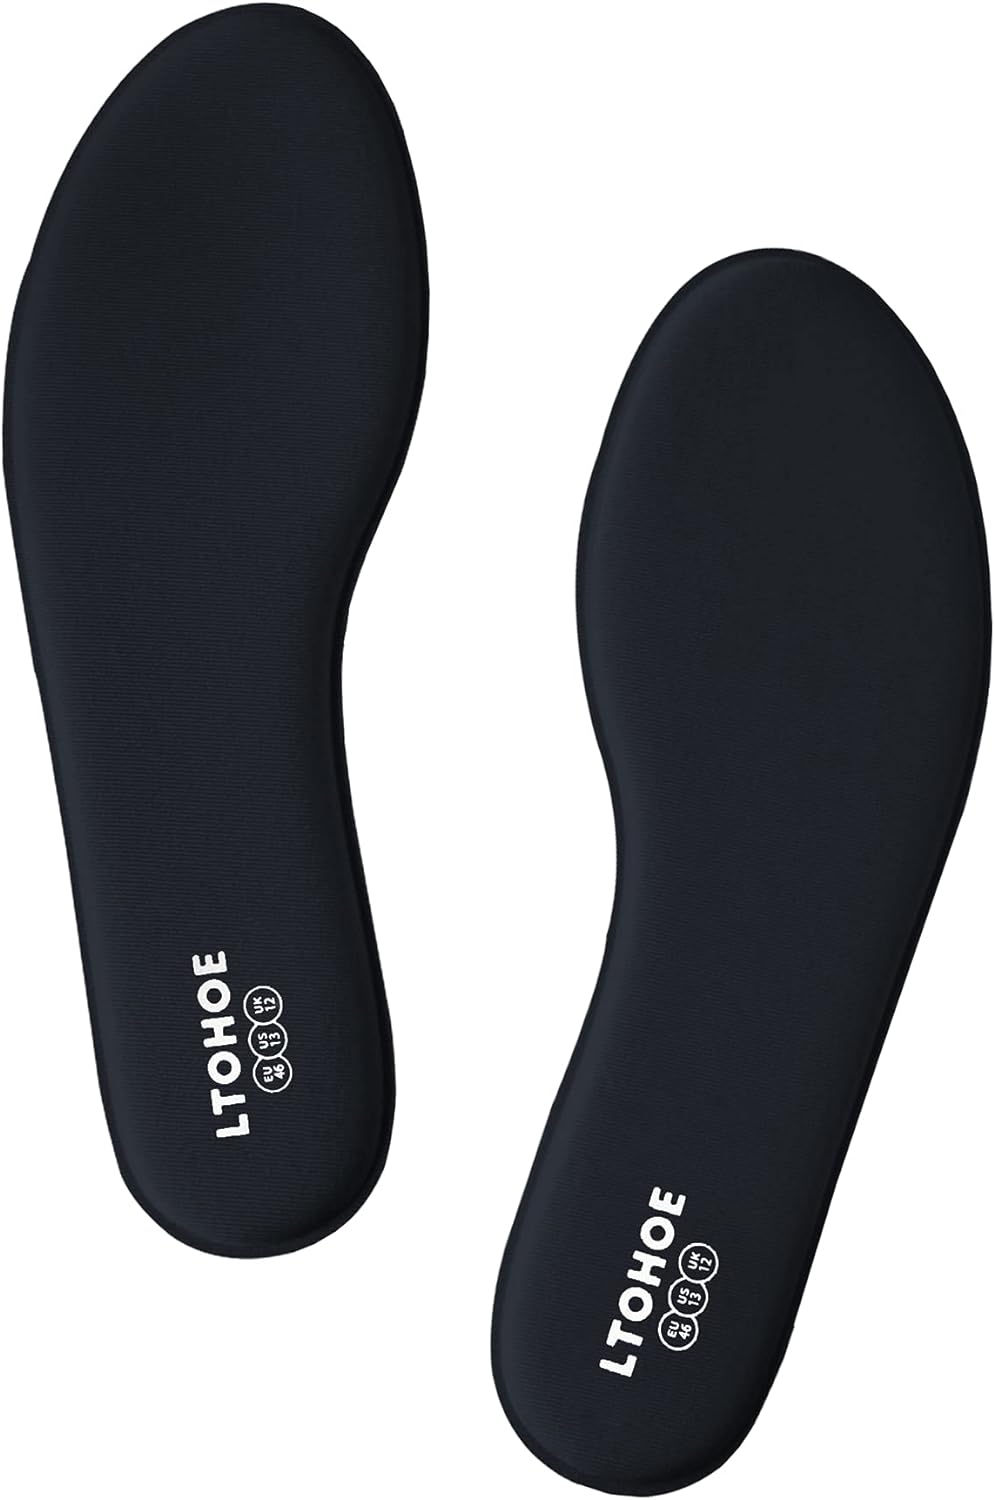 Memory Foam Insoles for Men, Replacement Shoe Inserts for Work Boot, Running Shoes, Hiking Shoes, Sneaker, Cushion Shoe Insoles Shock Absorbing for Foot Pain Relief, Comfort Inner Soles Black US 10